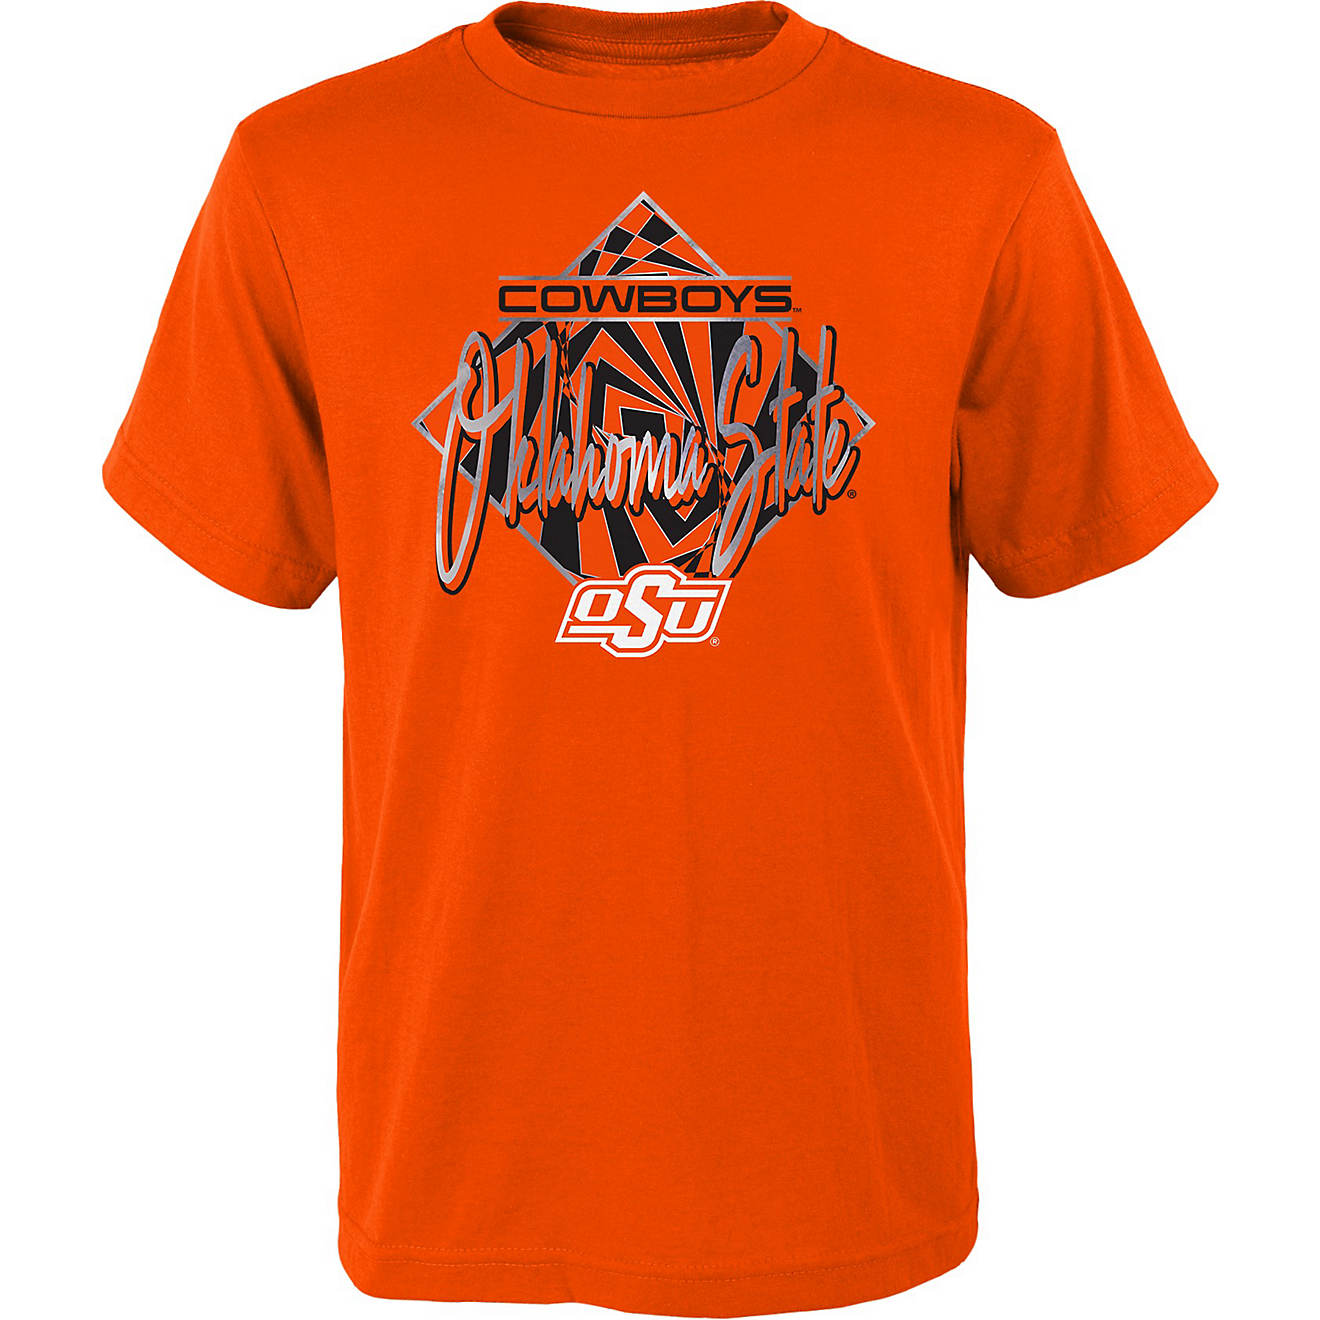 Outerstuff Youth Oklahoma State University La Jolla T-shirt                                                                      - view number 1